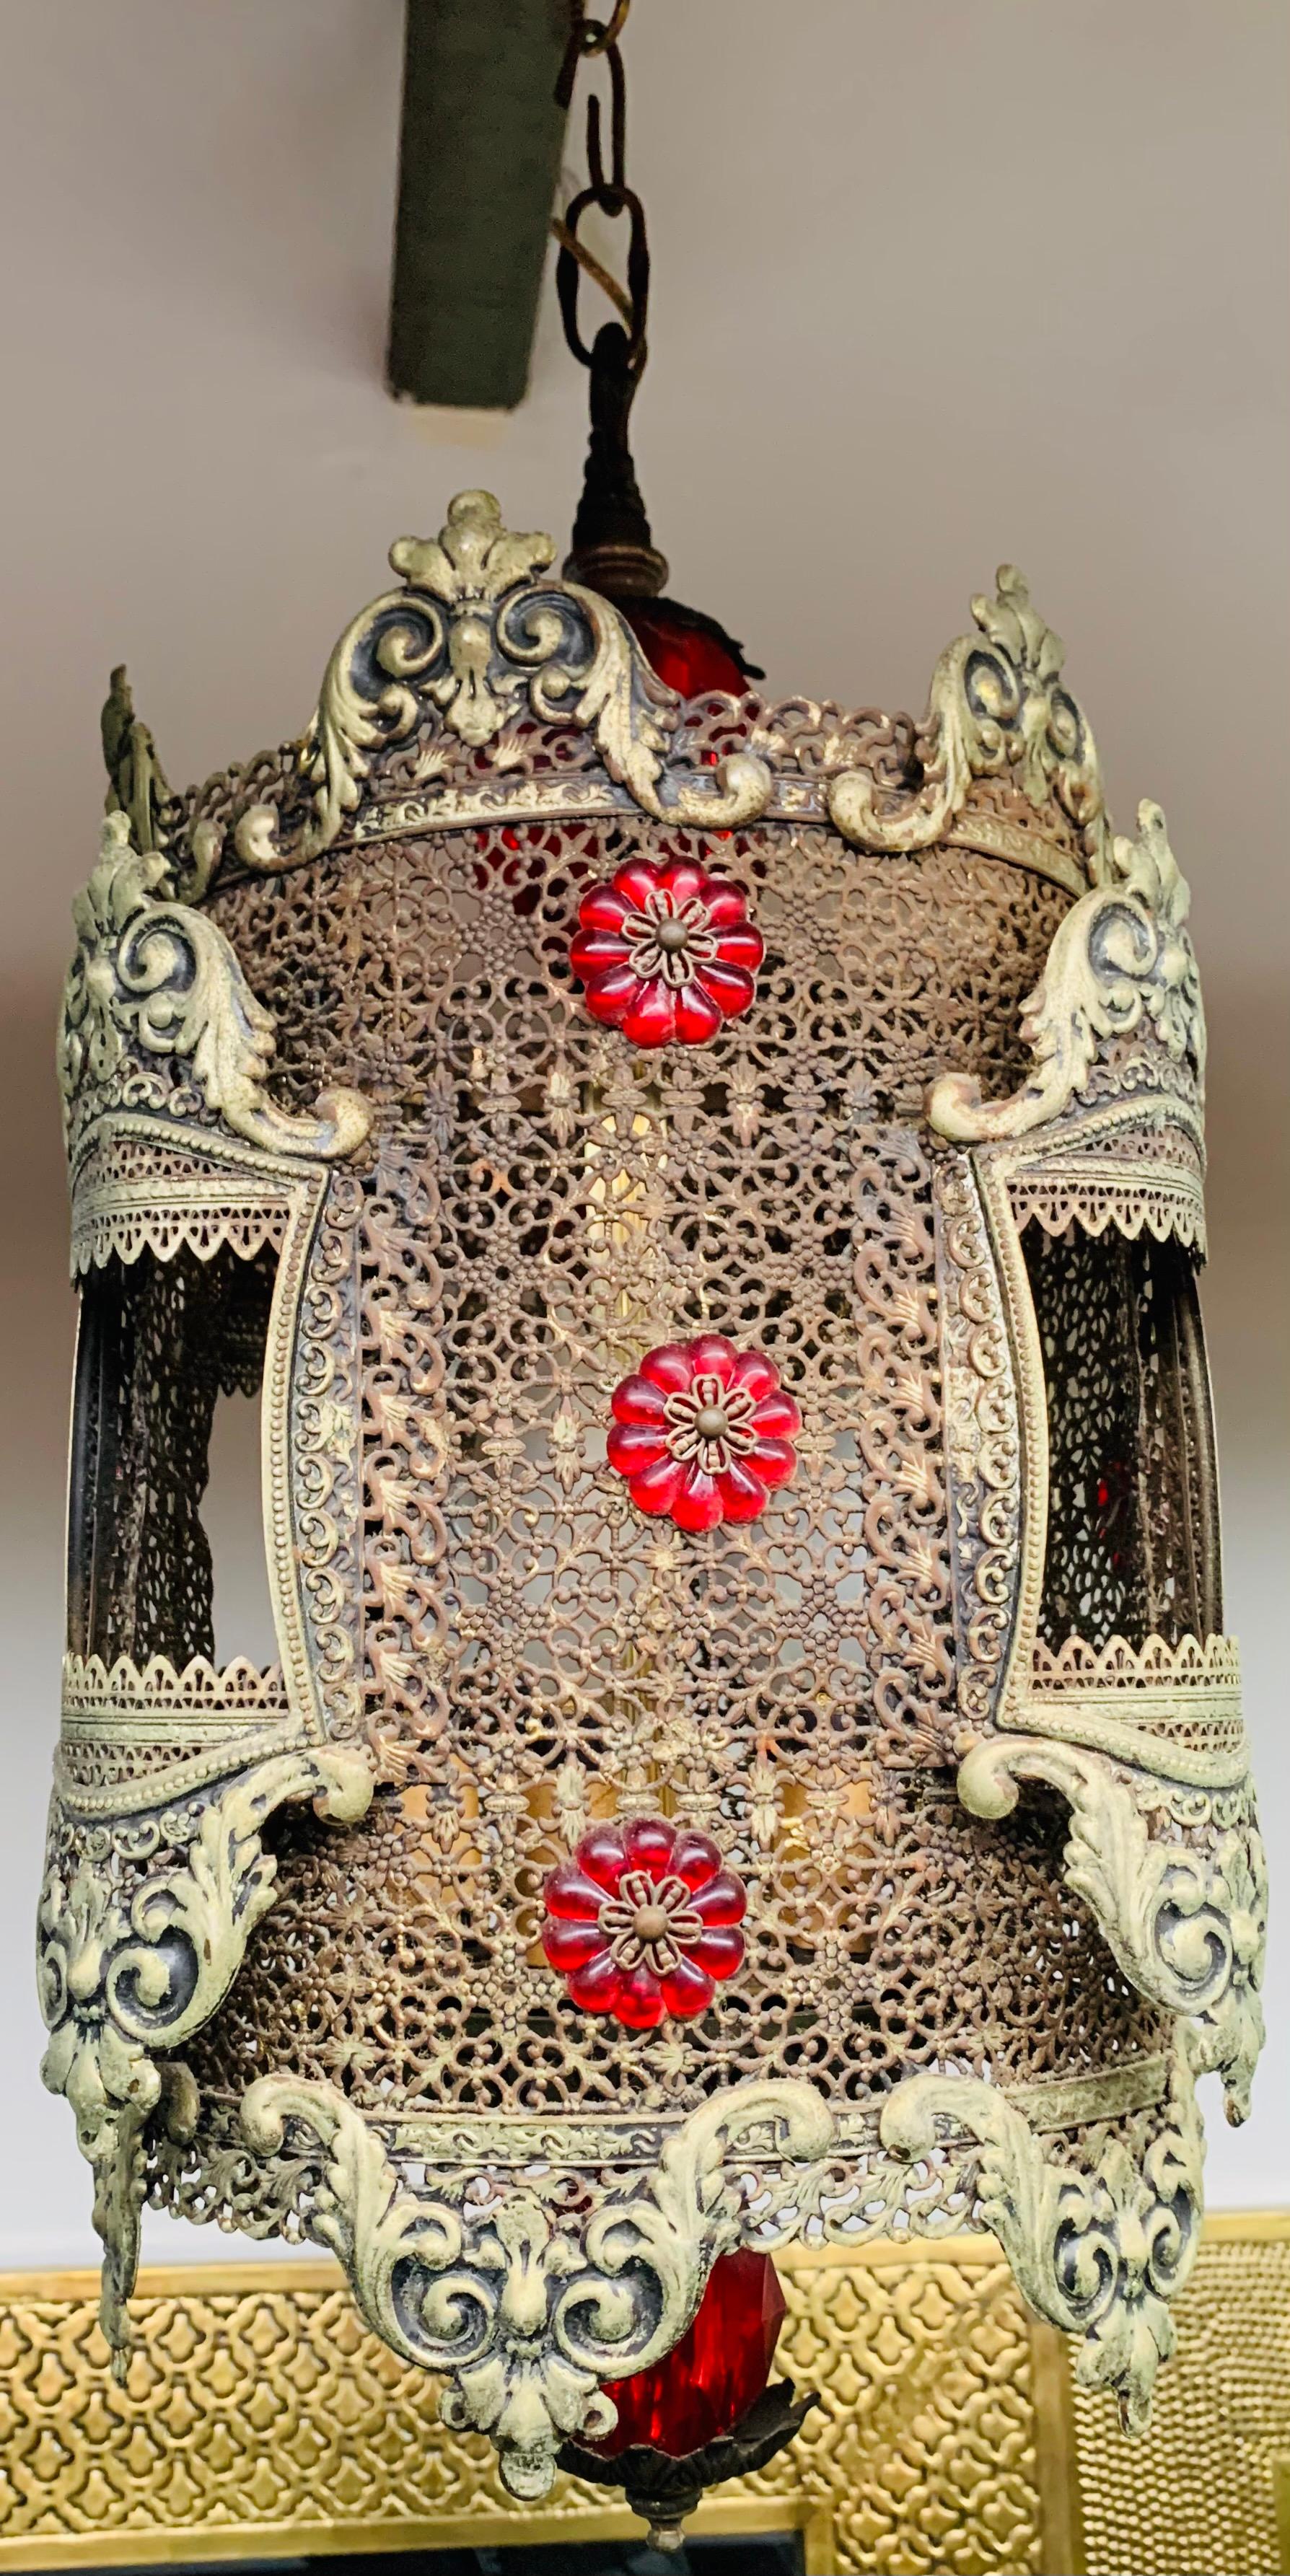 A decorative 1970s oriental style hanging gilt metal lantern or pendant. The cylindric shaped lantern features decorative red faux crystals and fine filigree design. The lantern will add an exotic touch to any space. 

Dimensions: 13.5